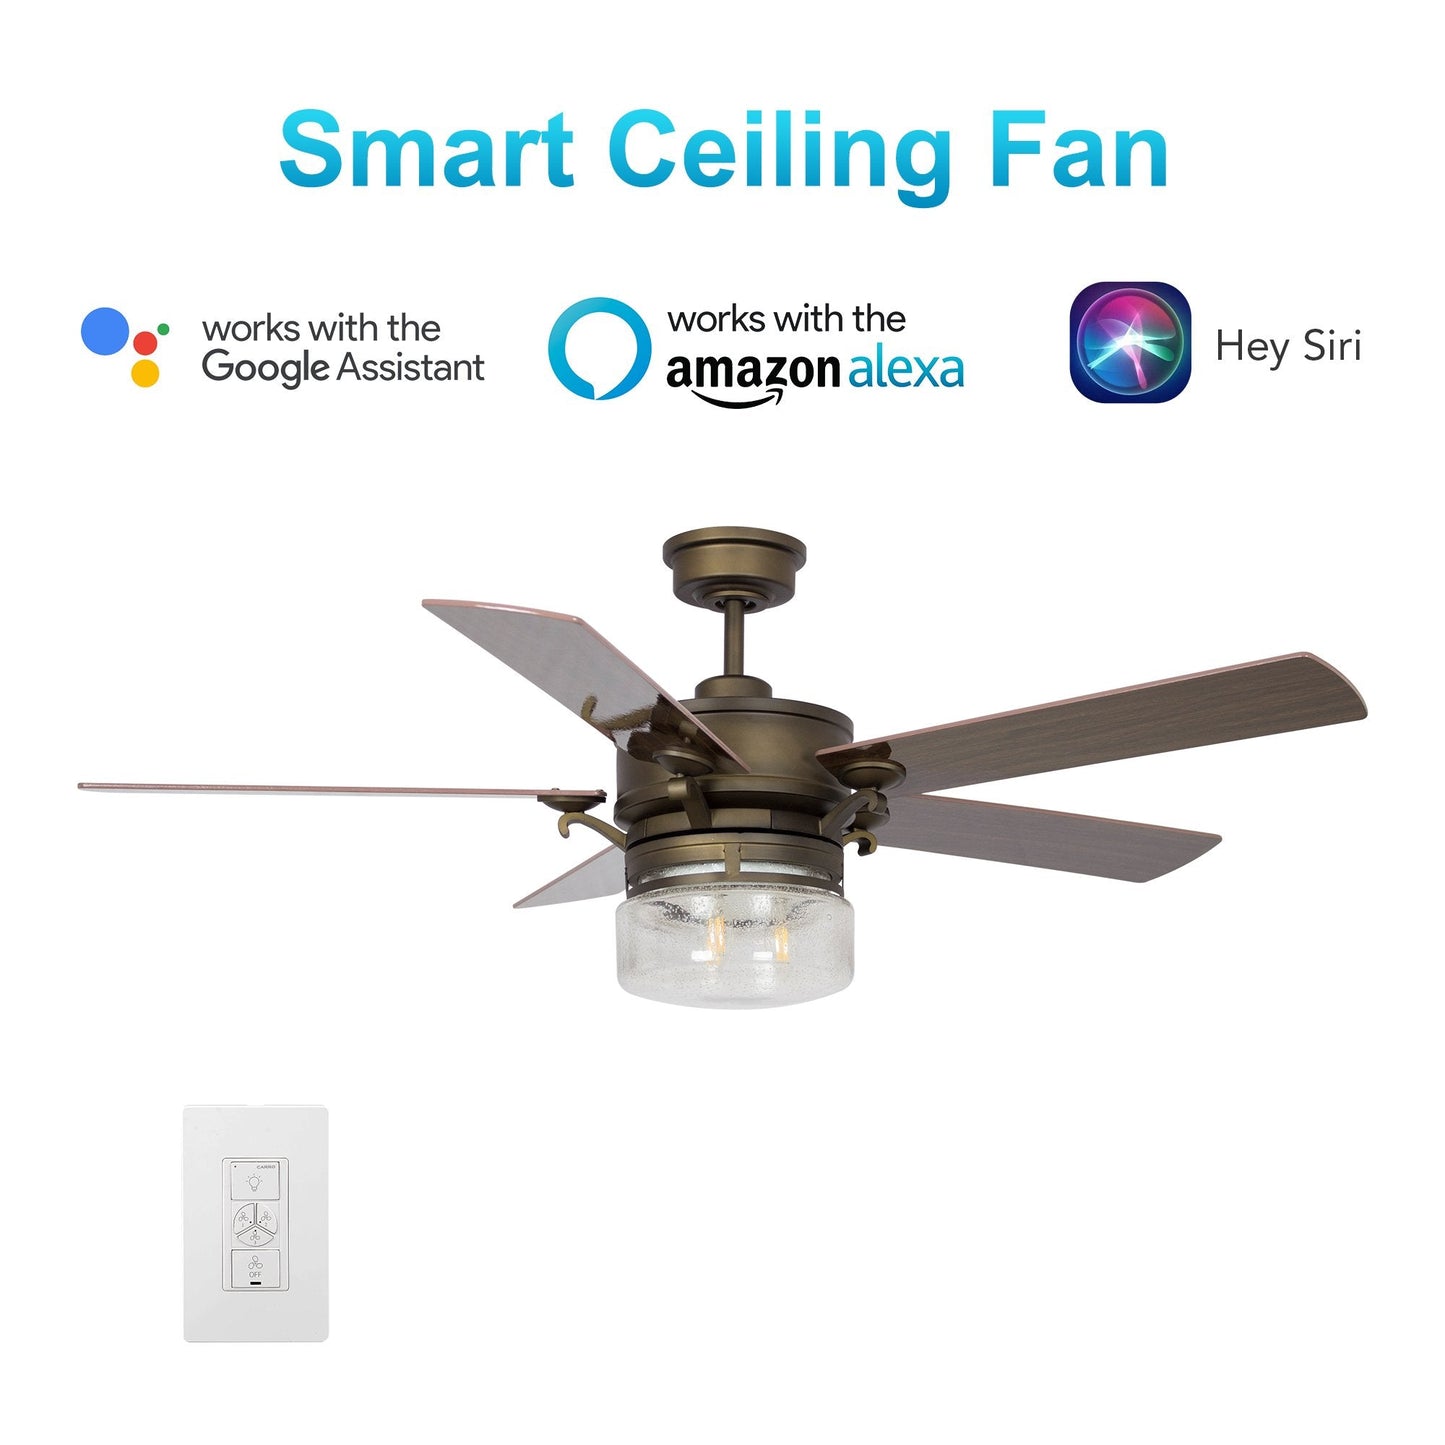 Alexandria 52'' Best Smart Ceiling Fan with wall control, Works with Google Assistant and Amazon Alexa,Siri Shortcut